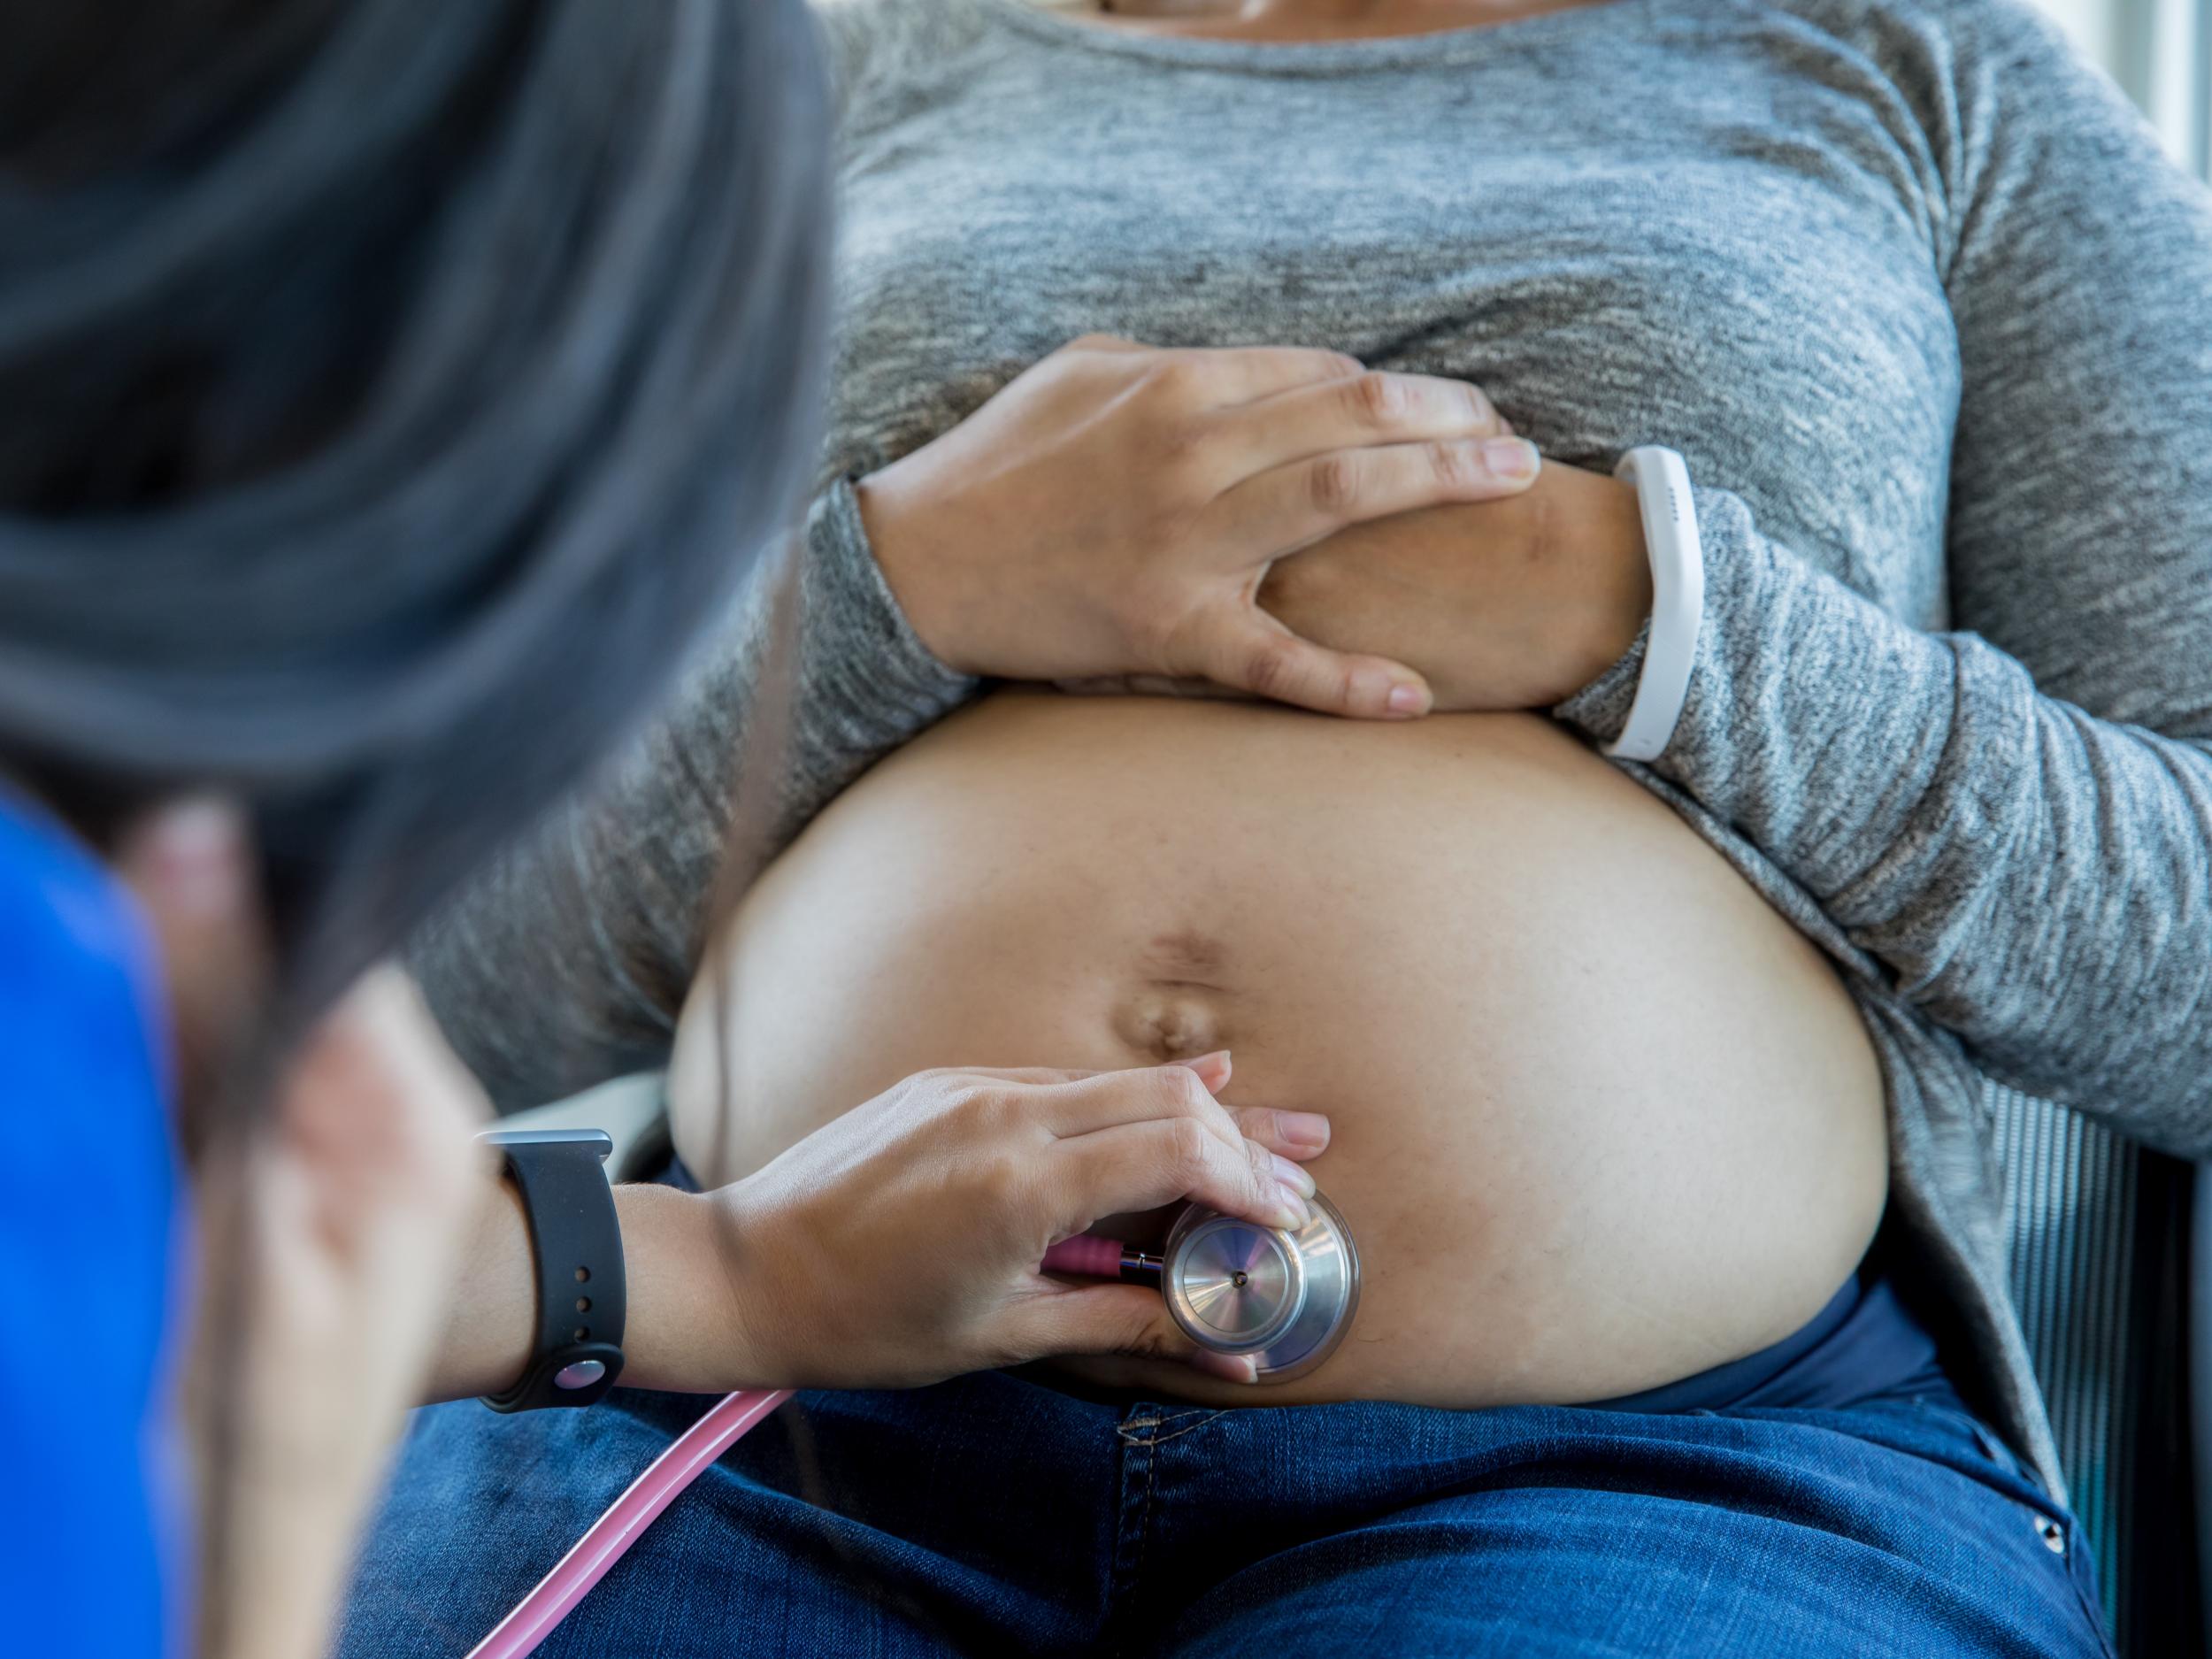 Higher rates of maternal deaths and stillbirths among black mothers are 'tip of the iceberg', experts say